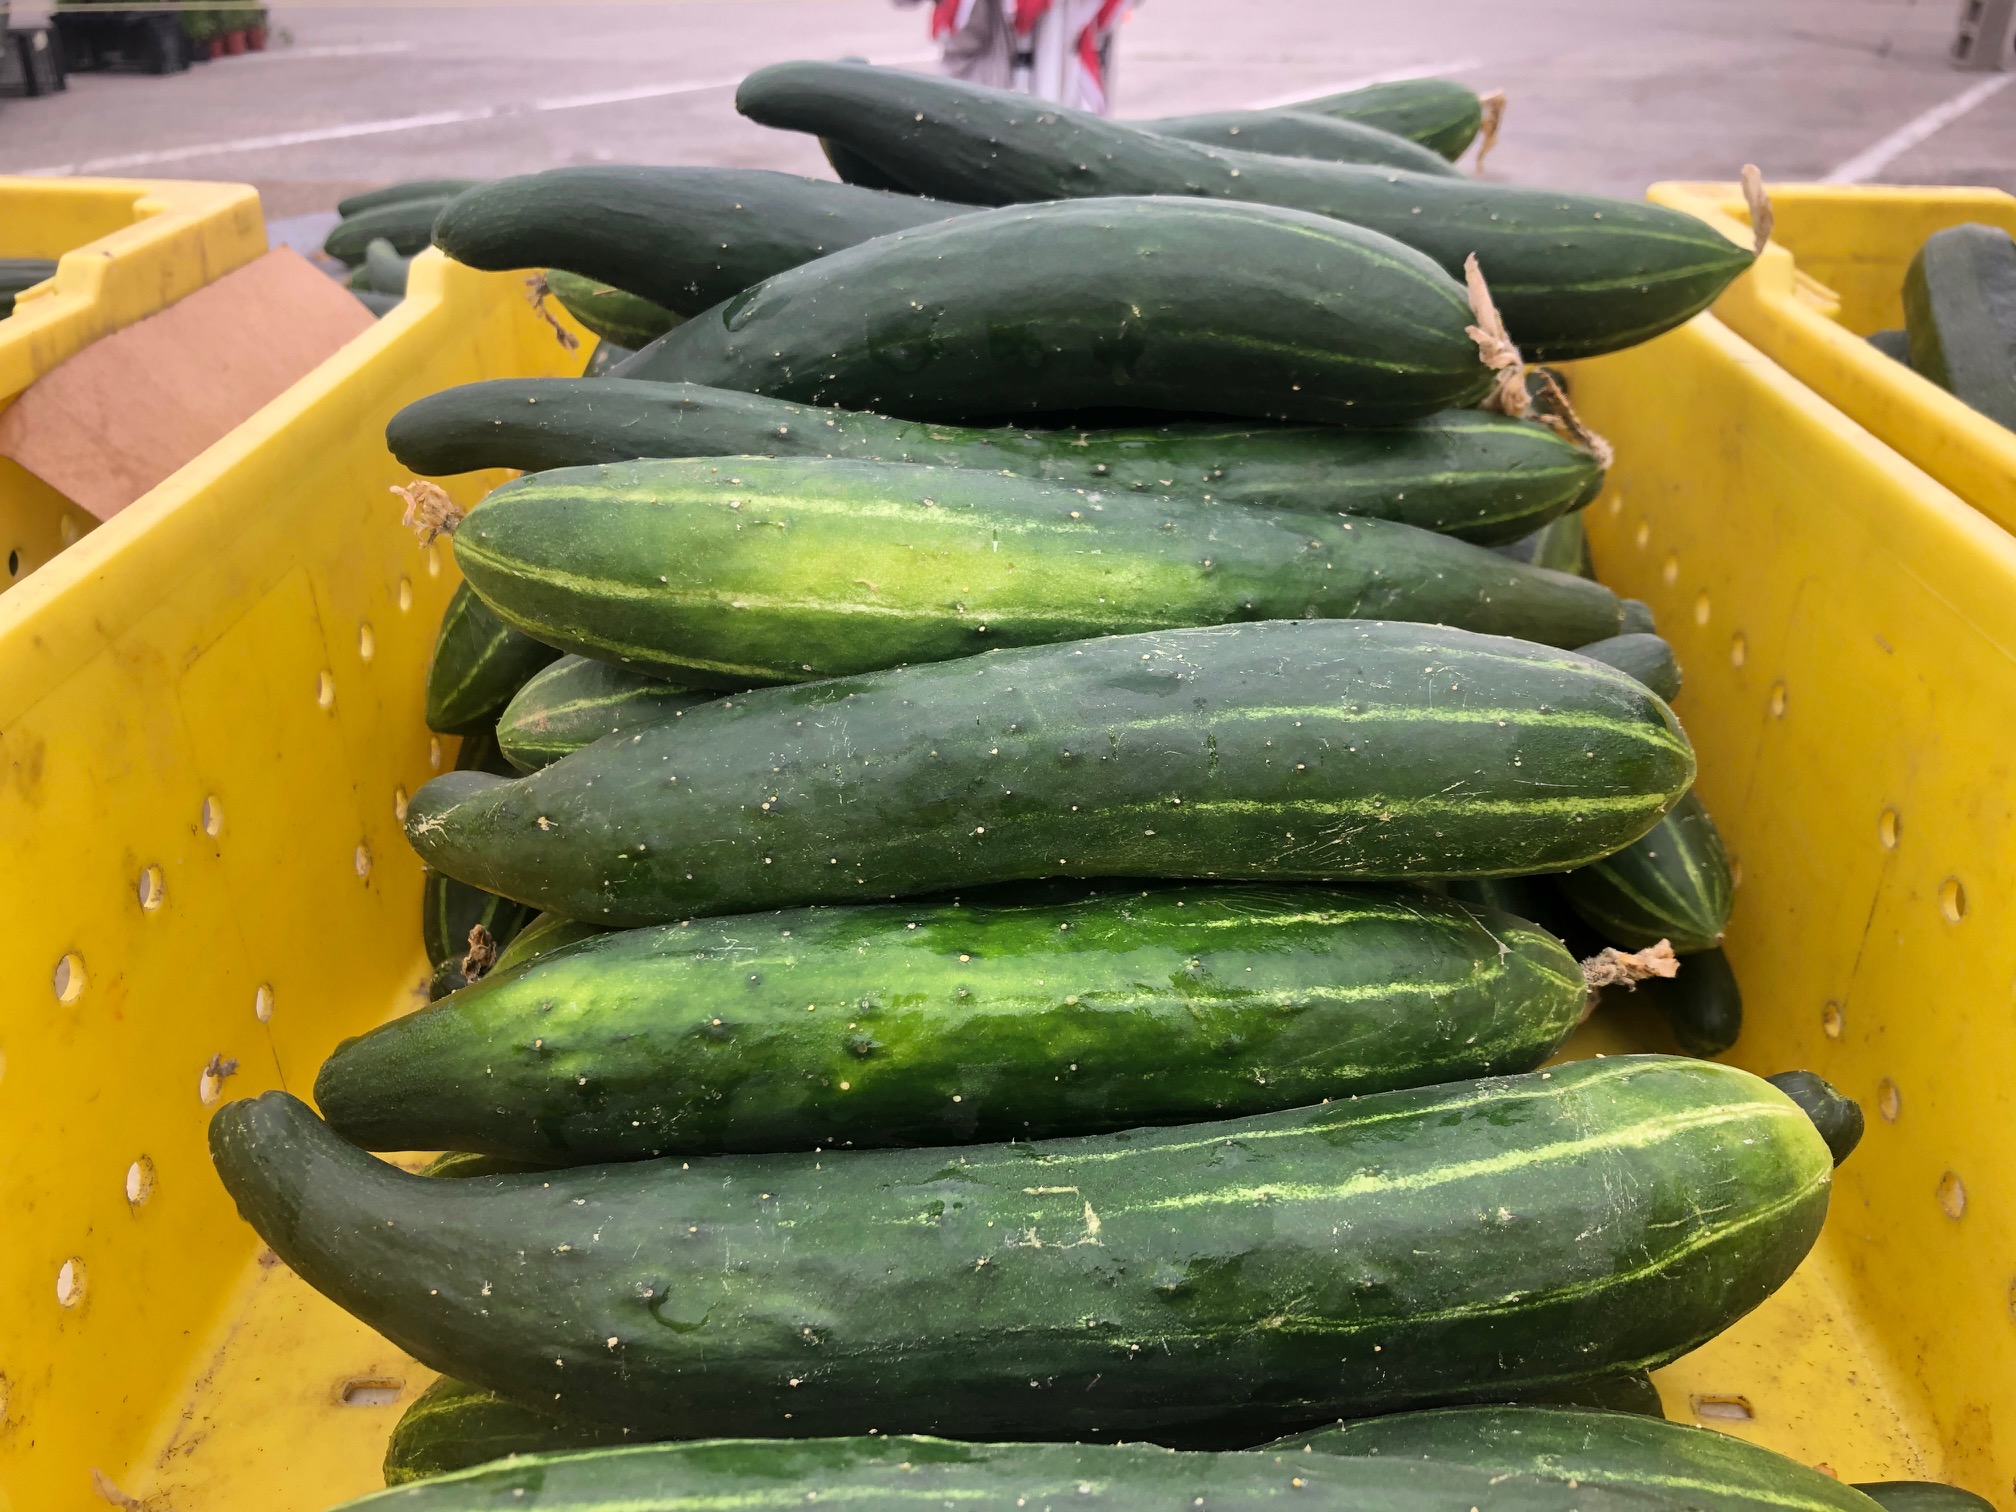 In a plastic yellow bin, there are Illinois-grown cucumbers for sale.  Photo by Alyssa Buckley.